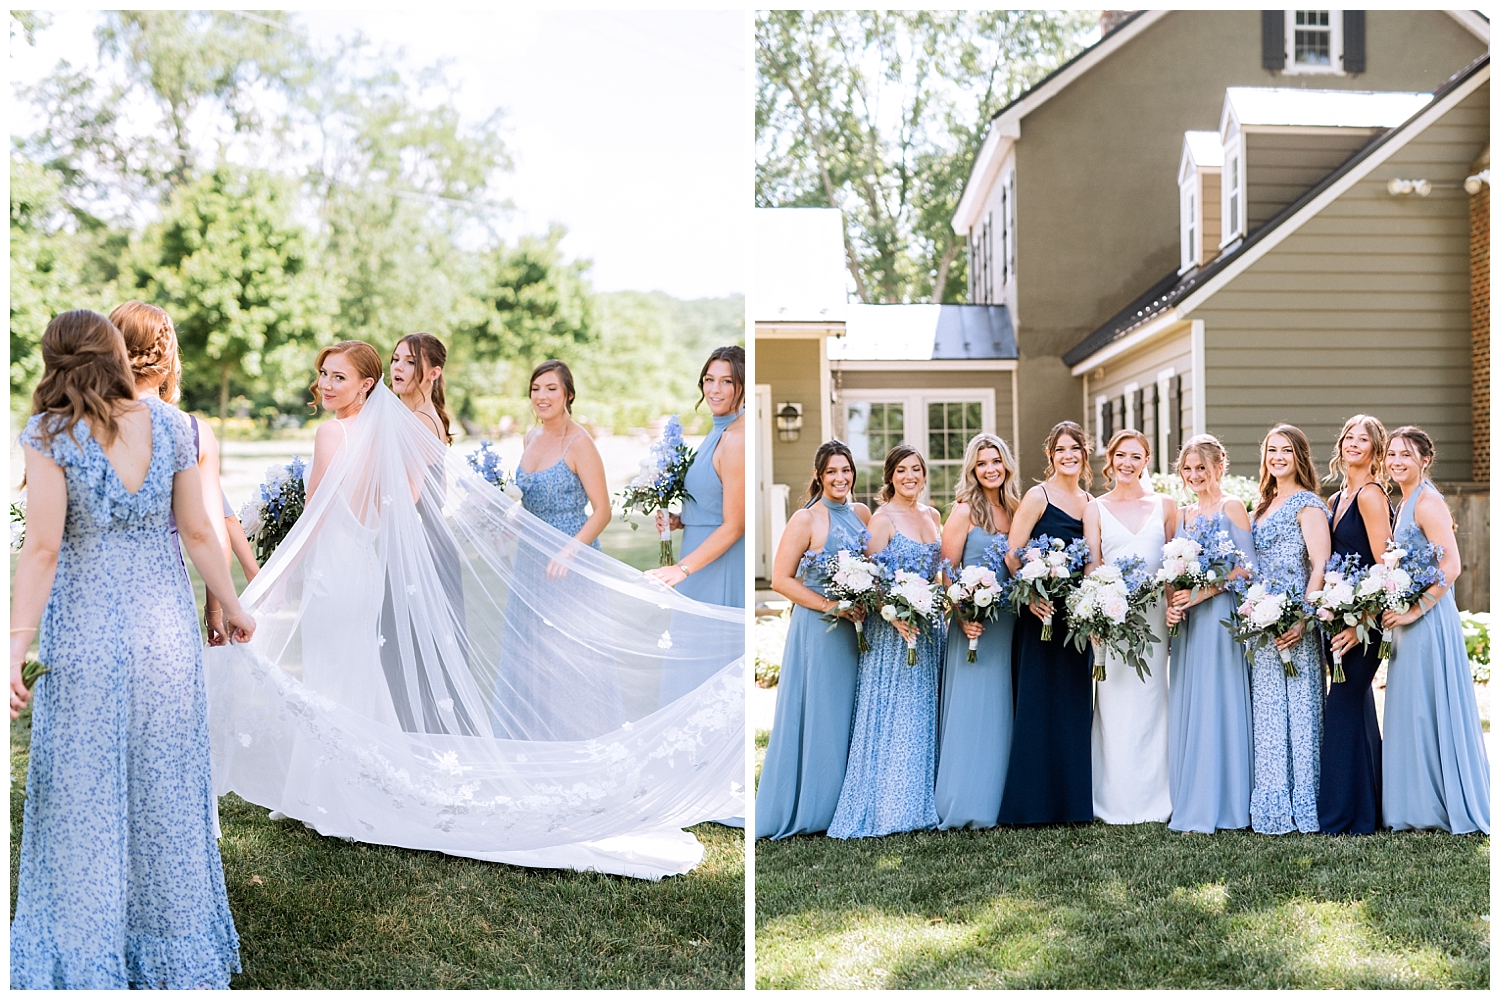 Bride with bridesmaids in mixed blue dresses at Fleetwood Farm Winery wedding in Leesburg, Virginia